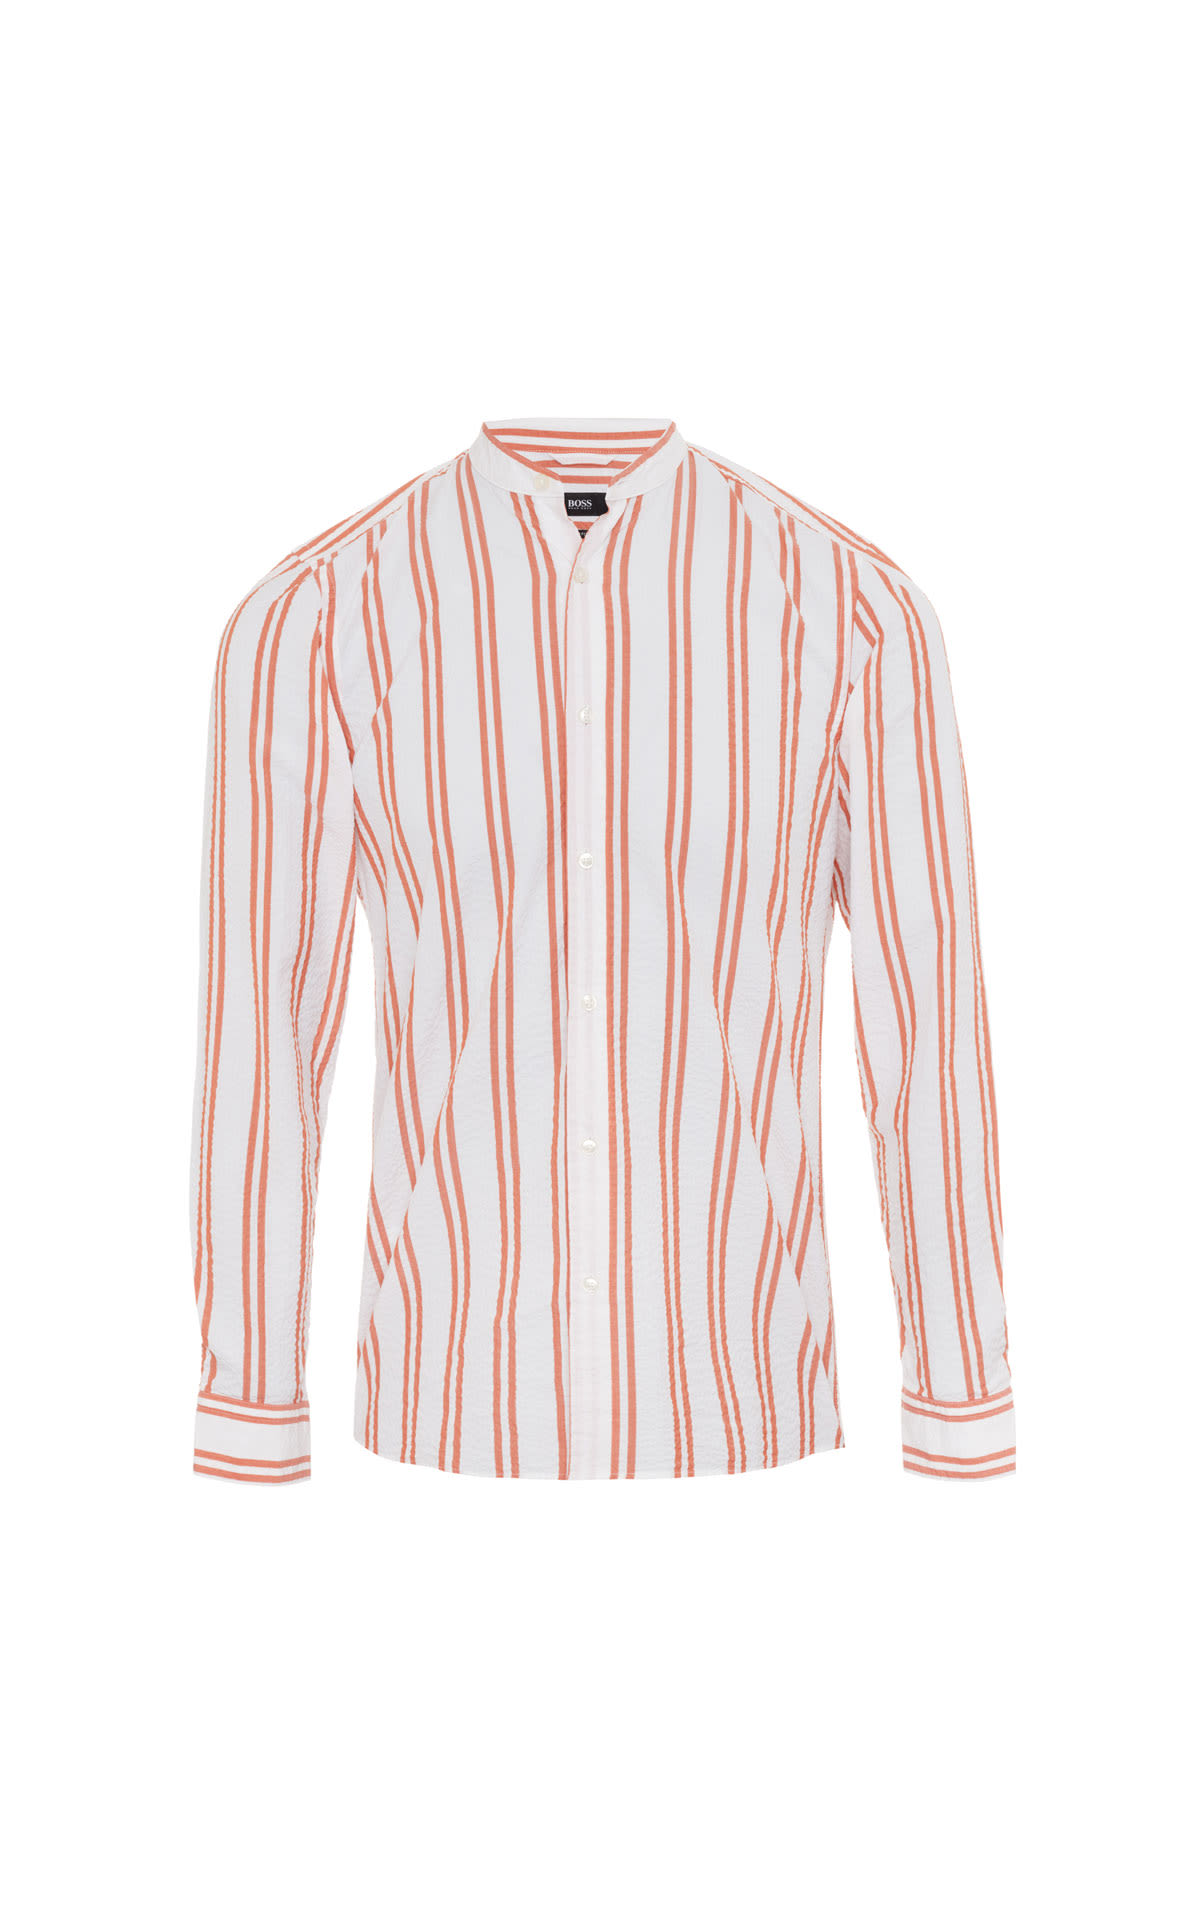 BOSS Striped shirt from Bicester Village